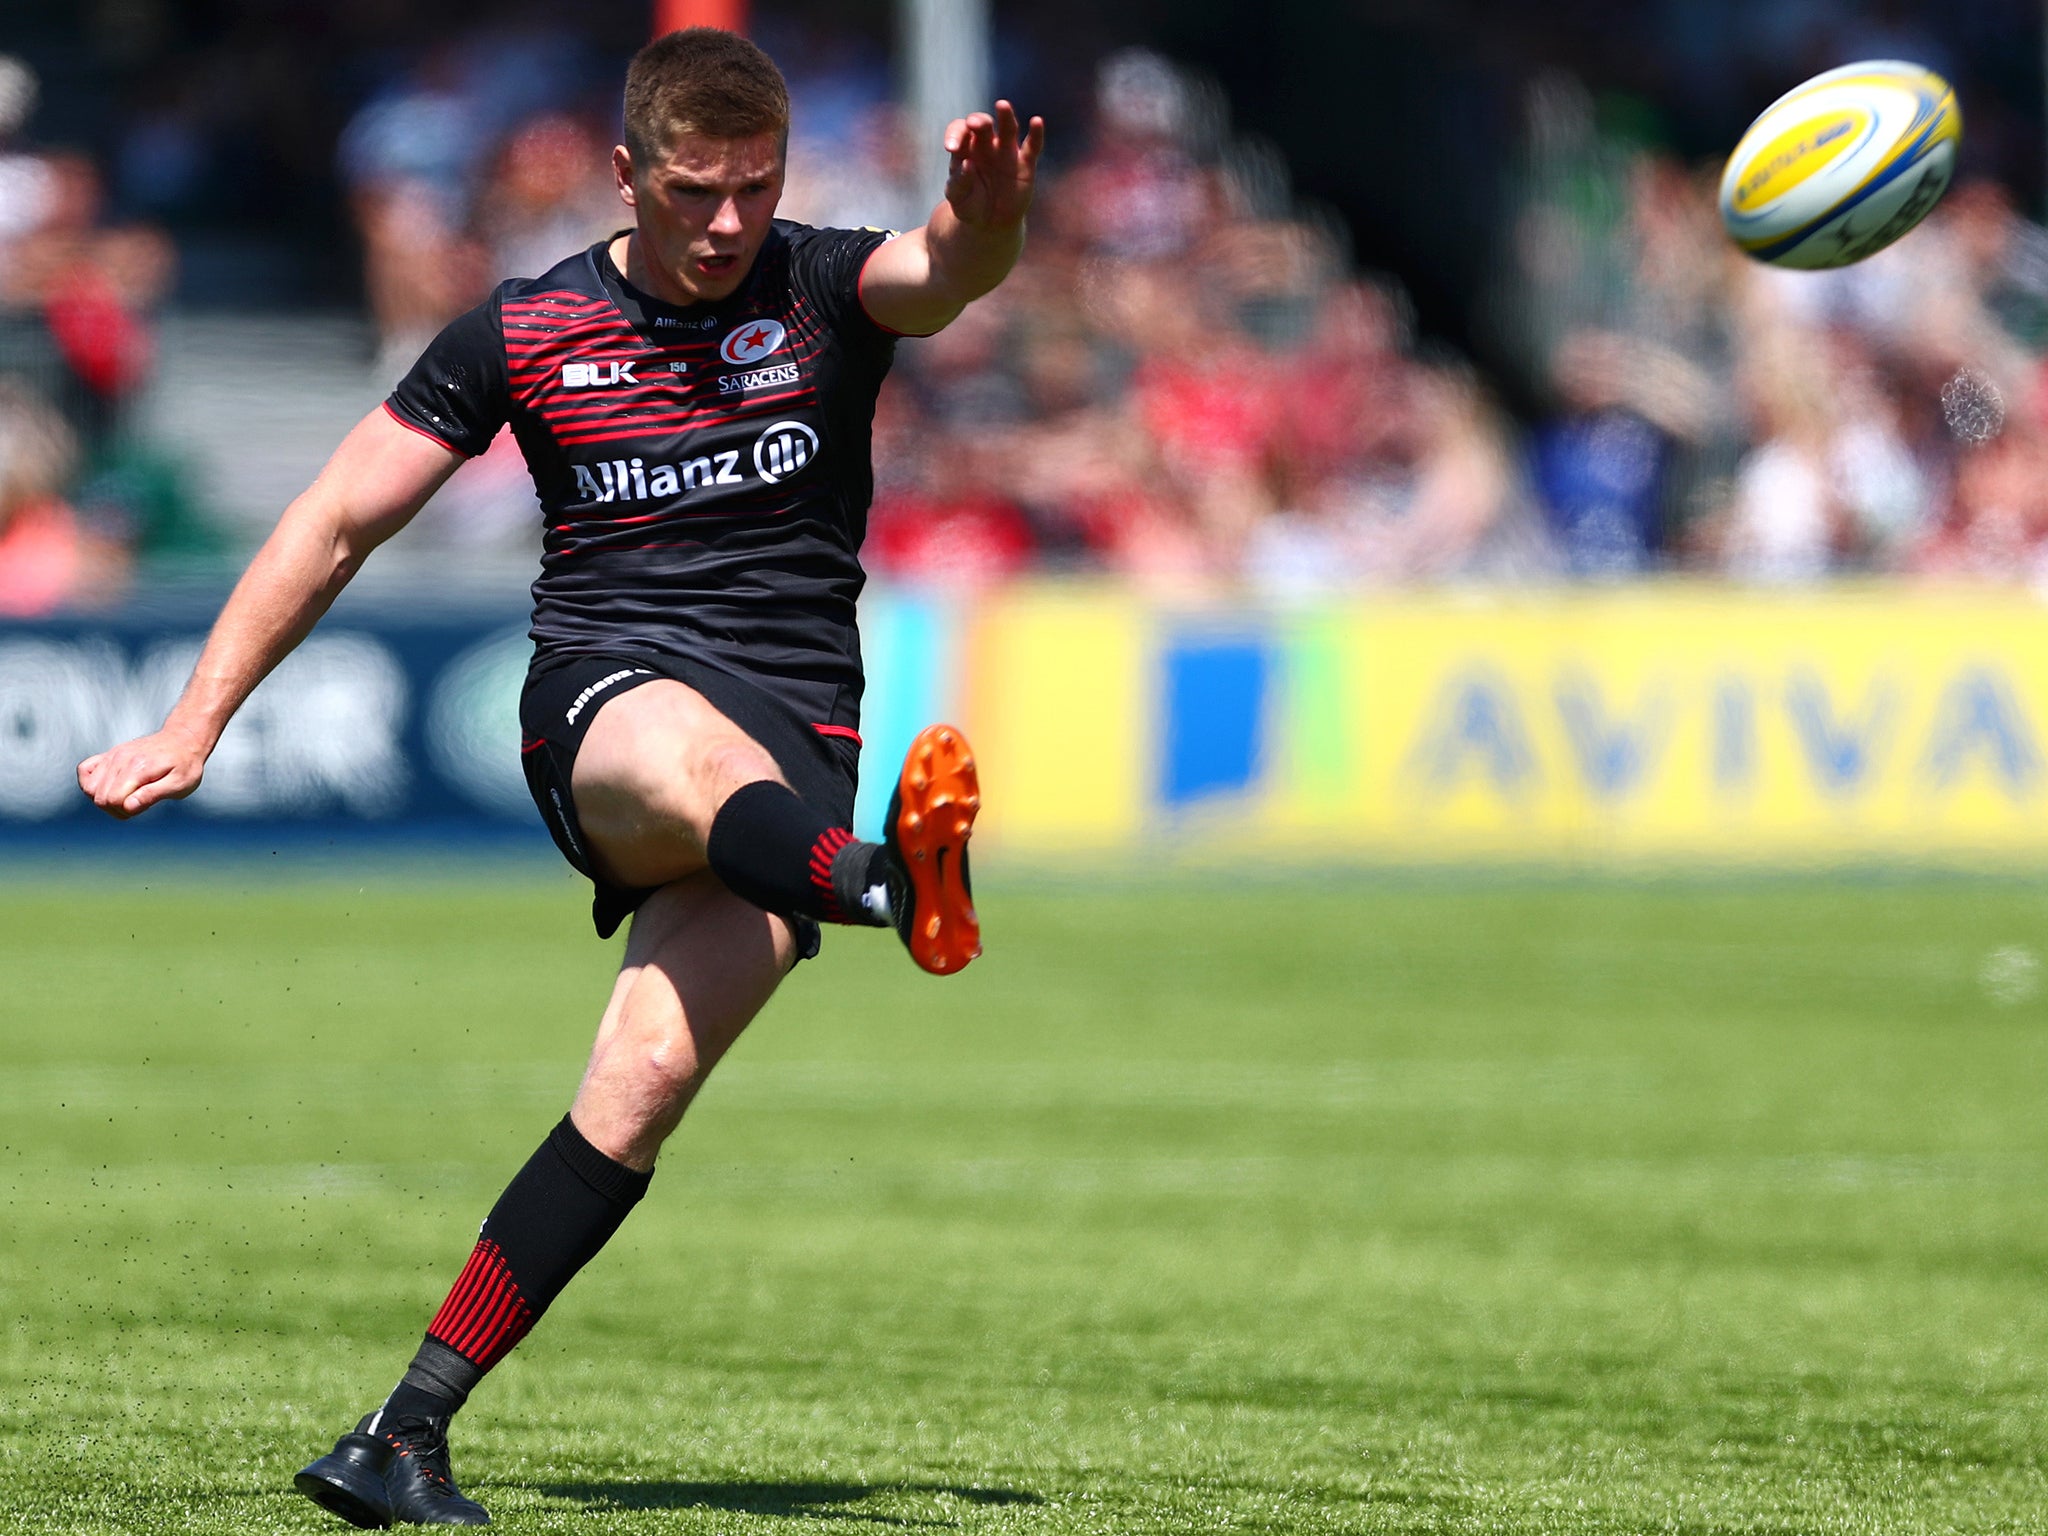 Simmonds goes up against the experience and class of Owen Farrell